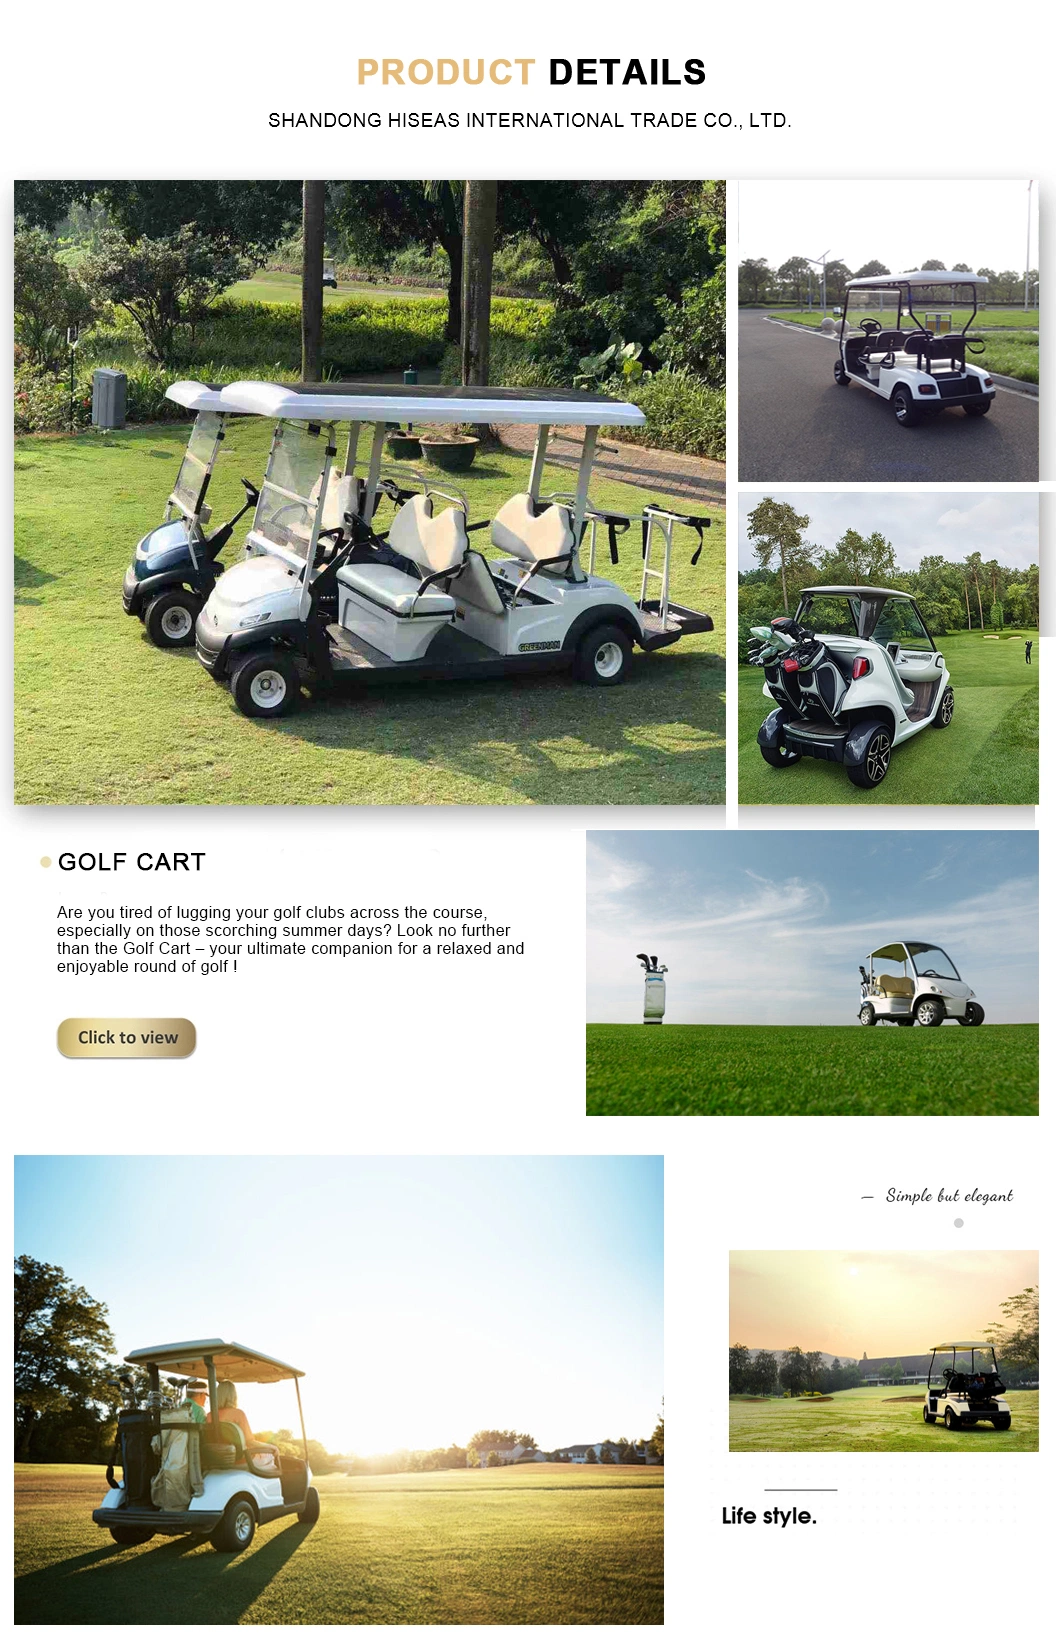 Have Ready Goods 2+2 Road off Wheels New off Road Electric 2X2 4 Seater Electric Golf Cart for Sale